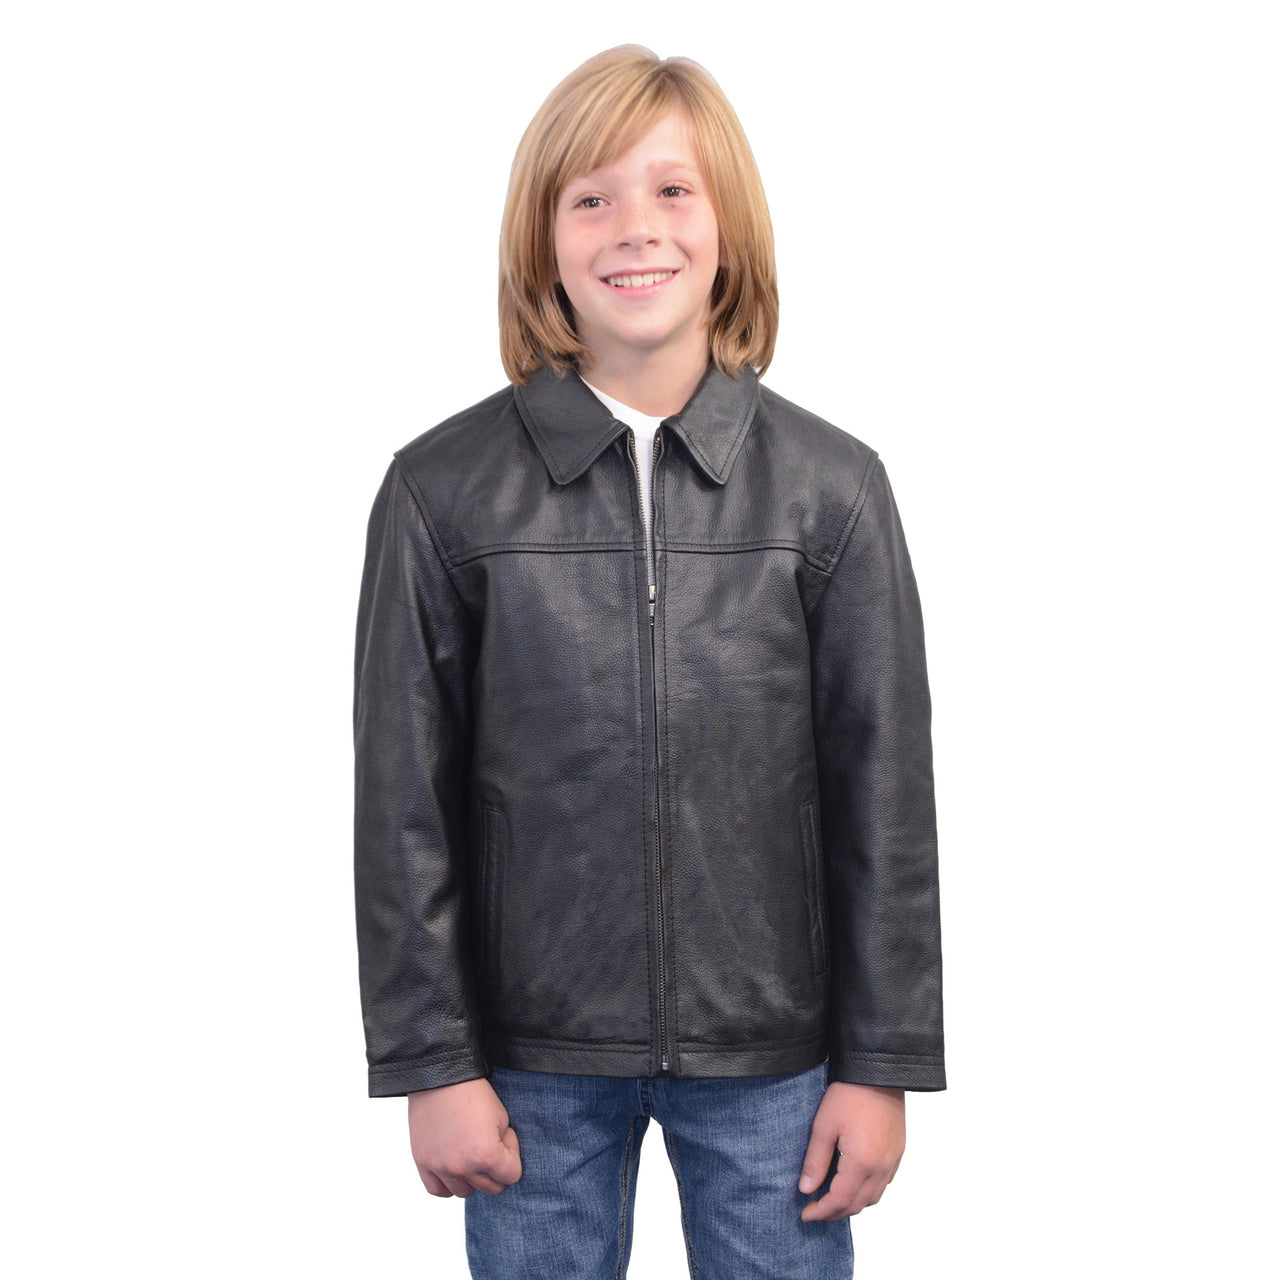 Youth Size Leather JD Zipper Front Jacket - HighwayLeather